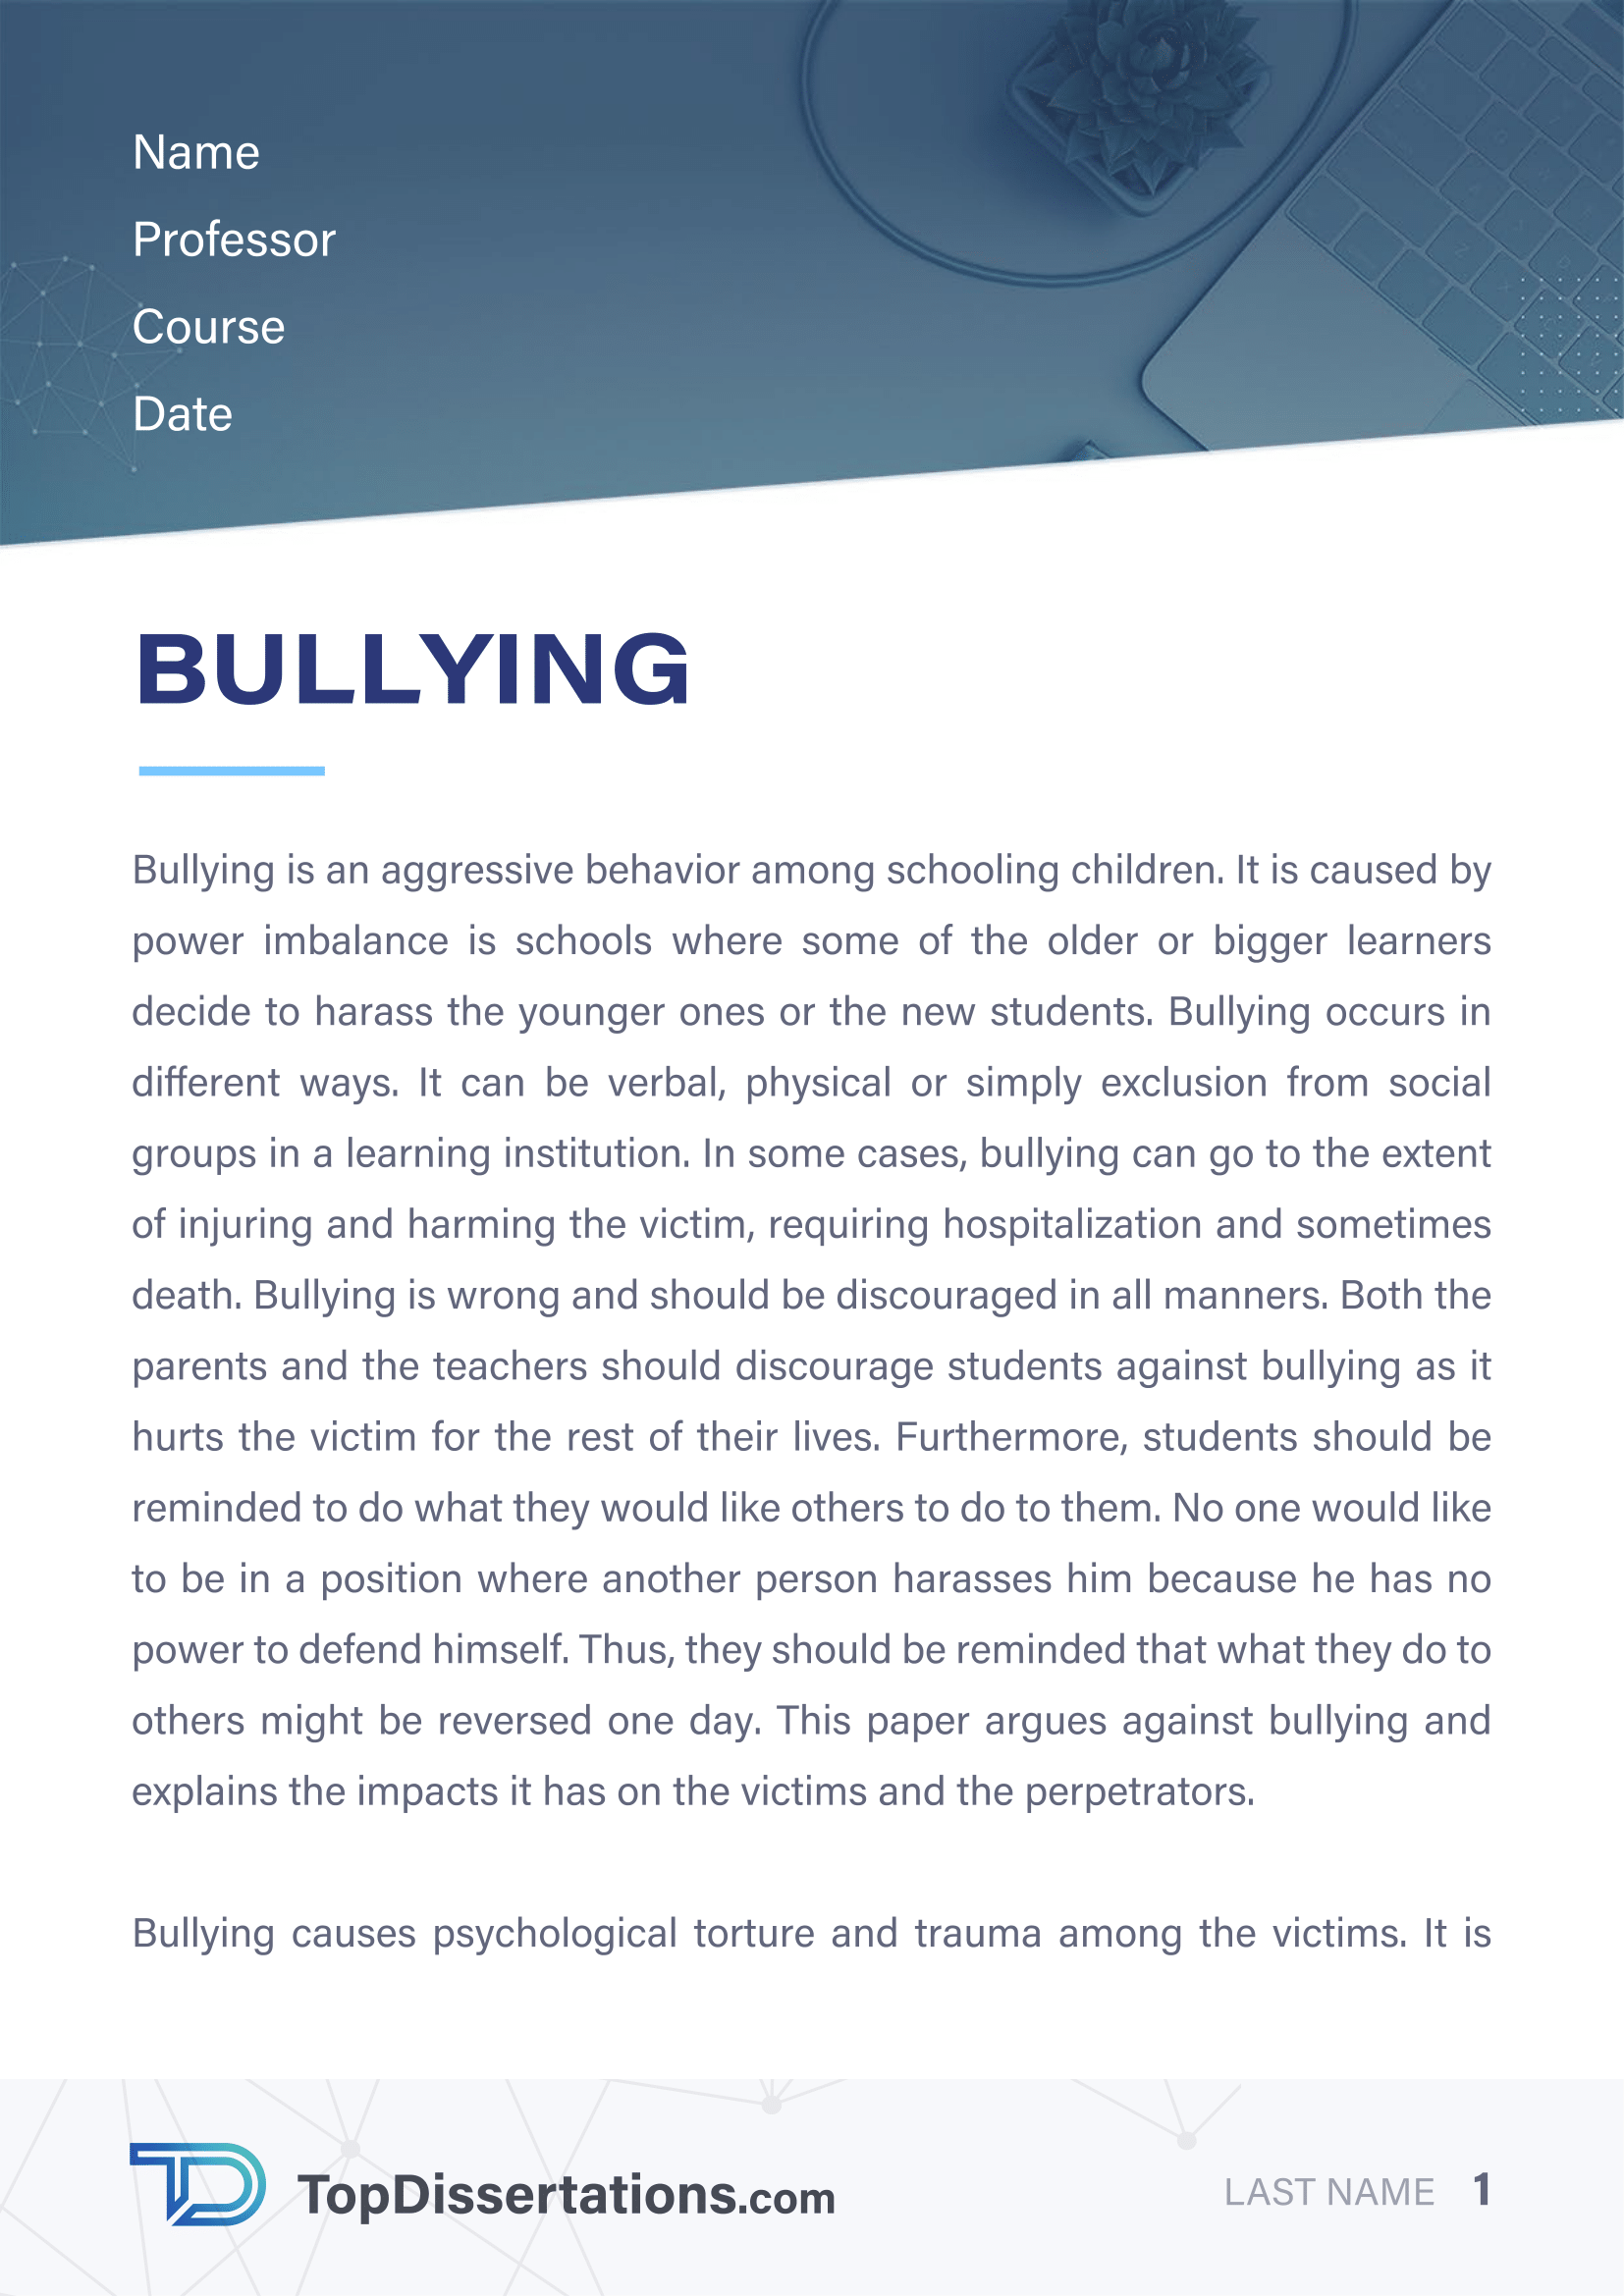 how to conclude an essay on bullying